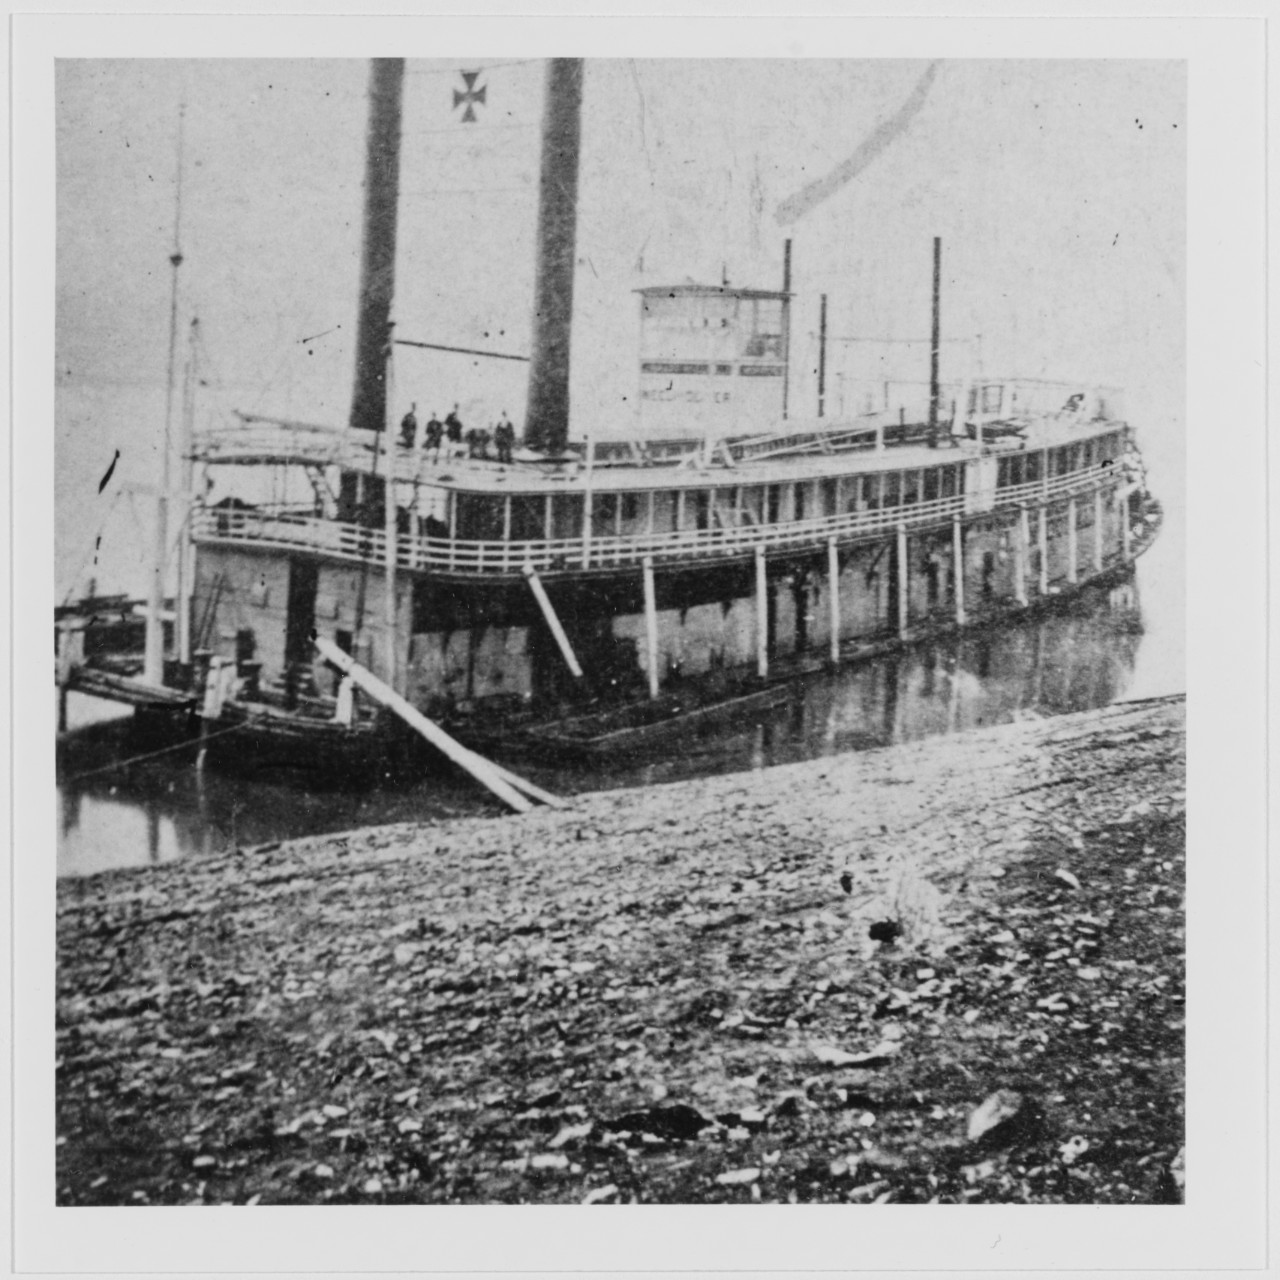 Stern-Wheel-Steamship J.E. MCDONALD photographed circa 1860-1890, probably on the American Western rivers